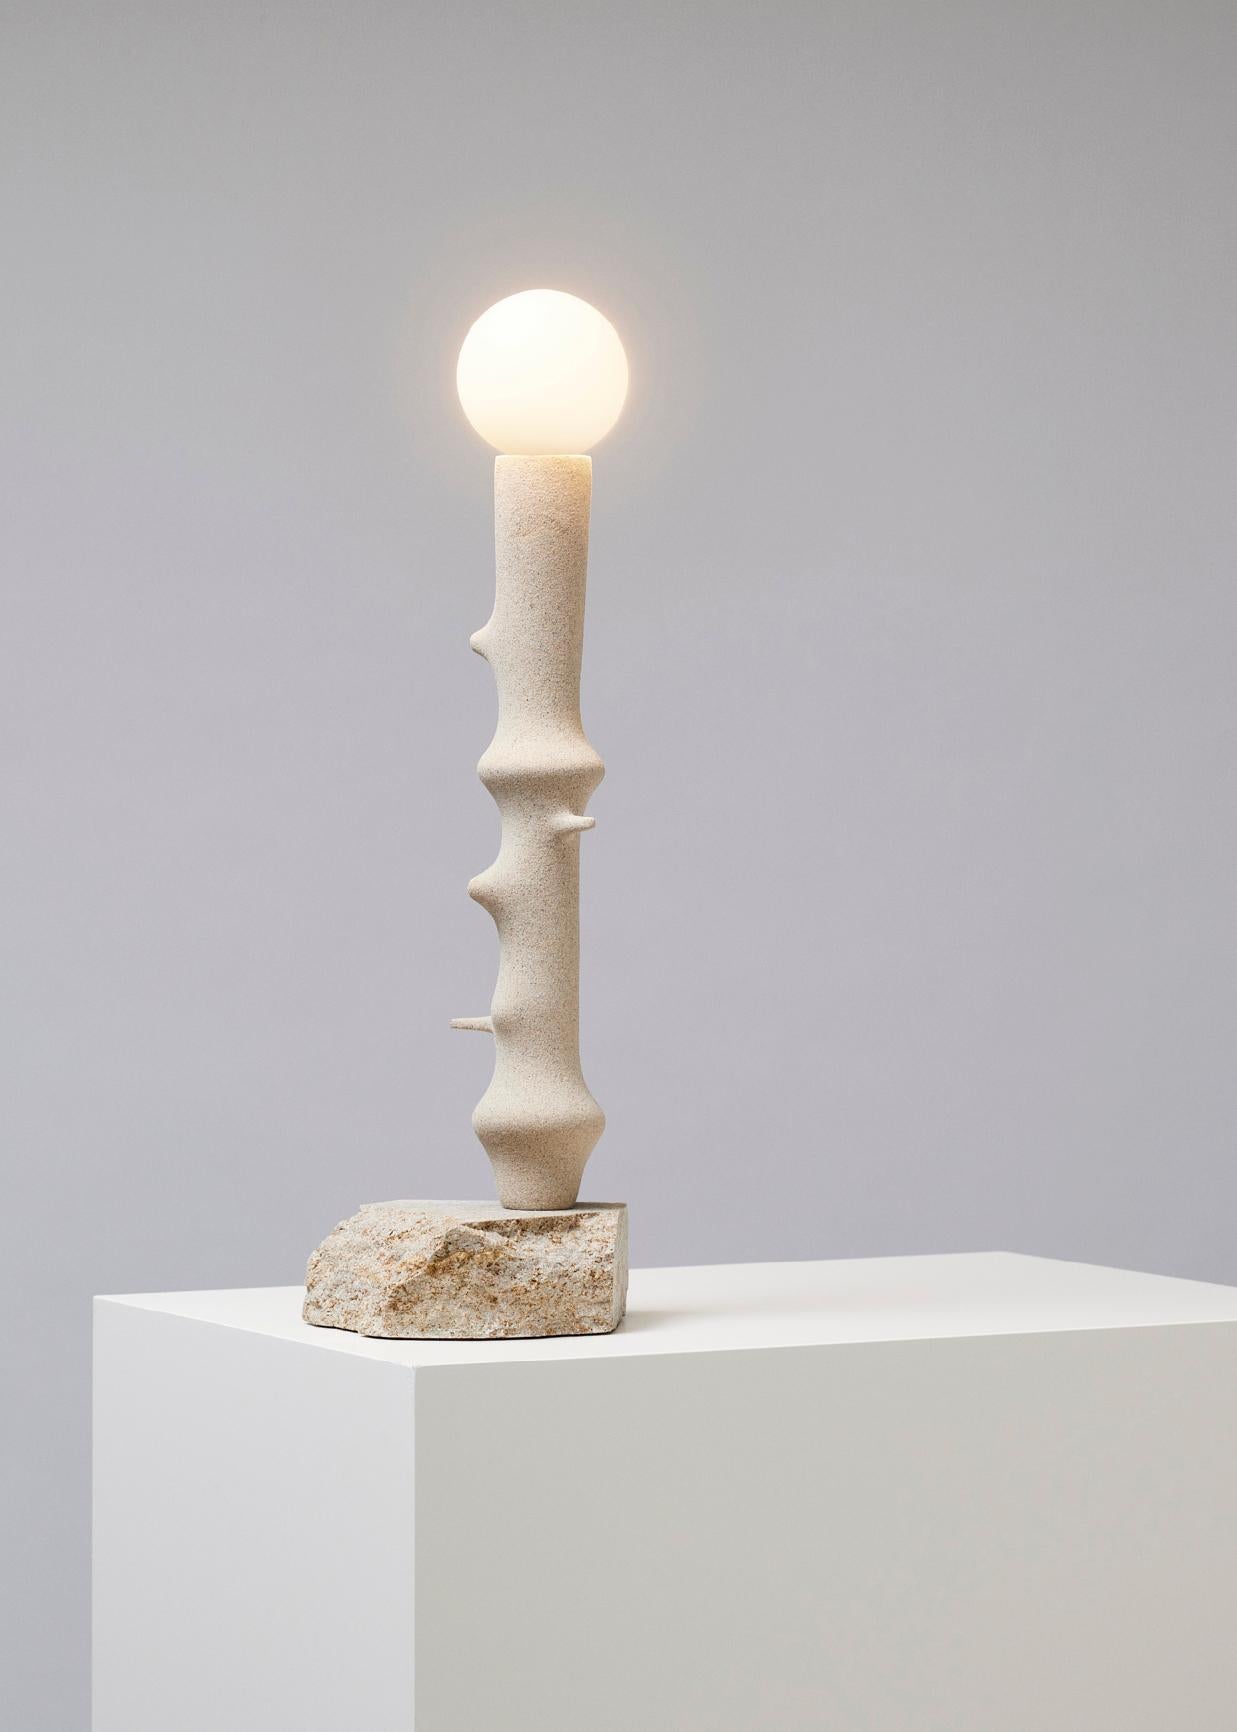 Panorama Table Lamp by Hot Wire Extensions
Exclusive Edition of 1 + 1 AP
Dimensions: D 17 x W 18 x H 56 cm 
Materials: Natural beige sand, waste nylon powder, found stone, reclaimed copper bits.
4 kg

Lively yet strong, the ‘Simulations Series’